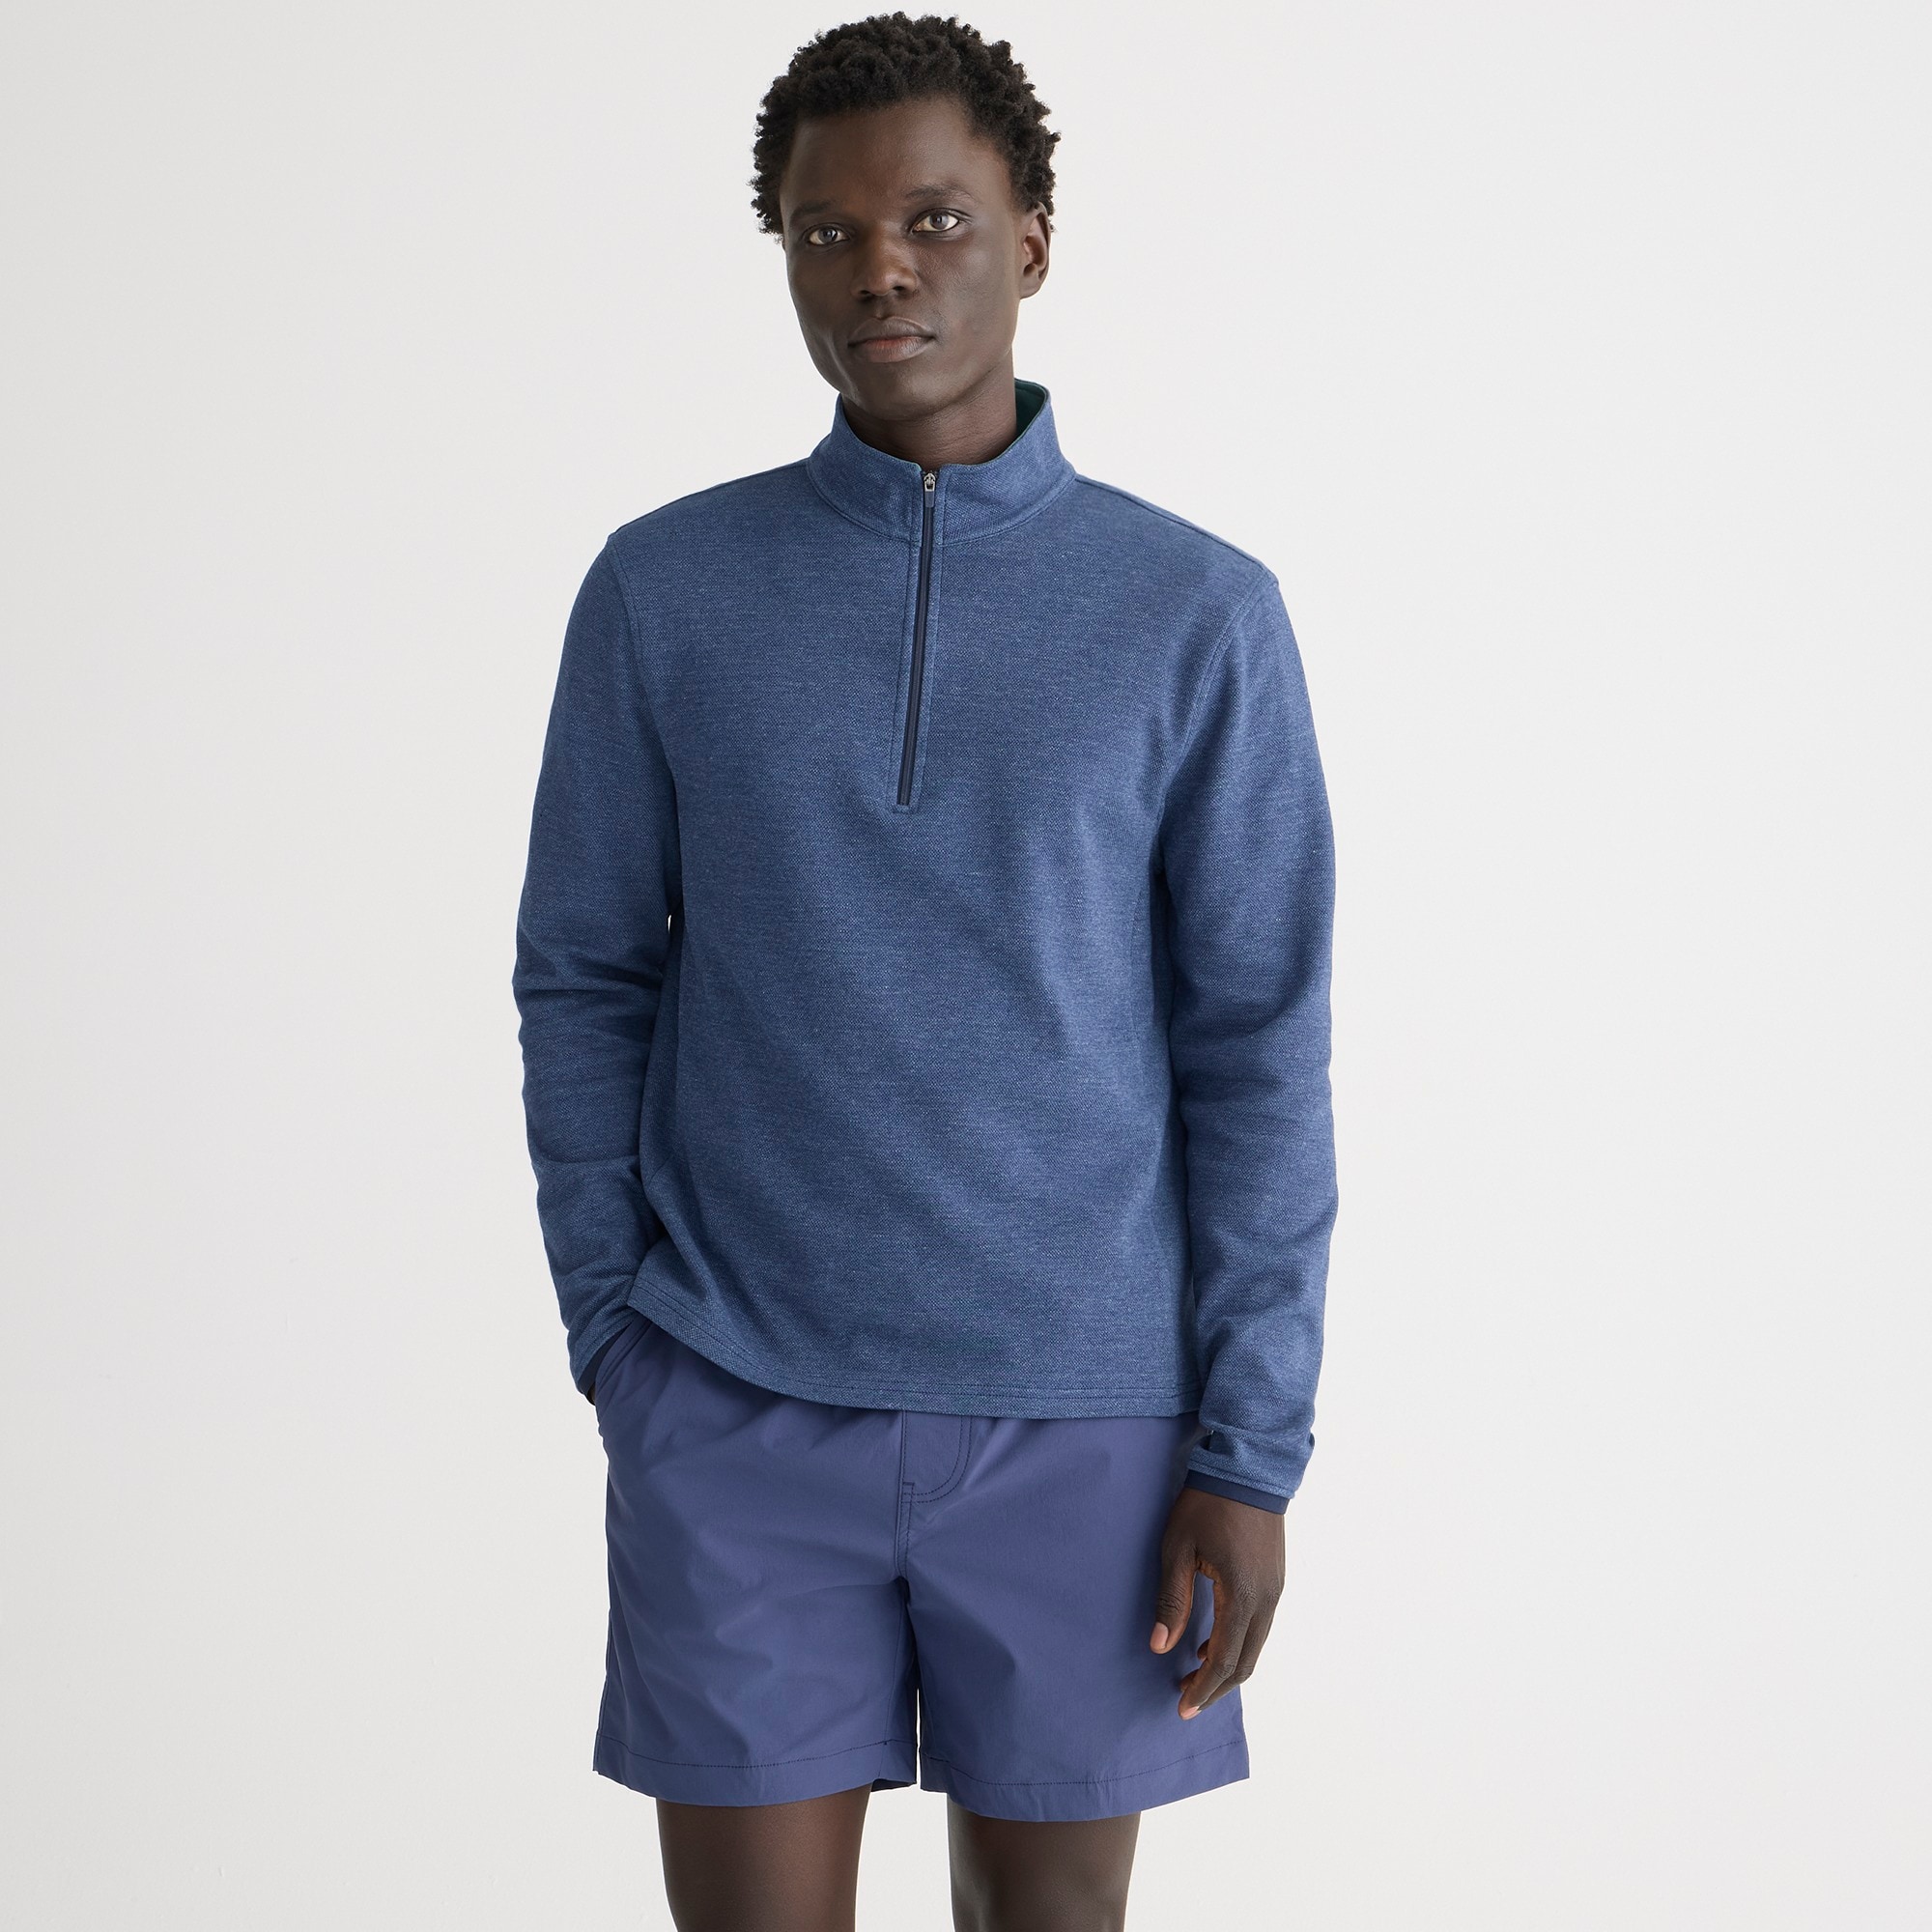  Performance half-zip pullover with COOLMAX&reg; technology